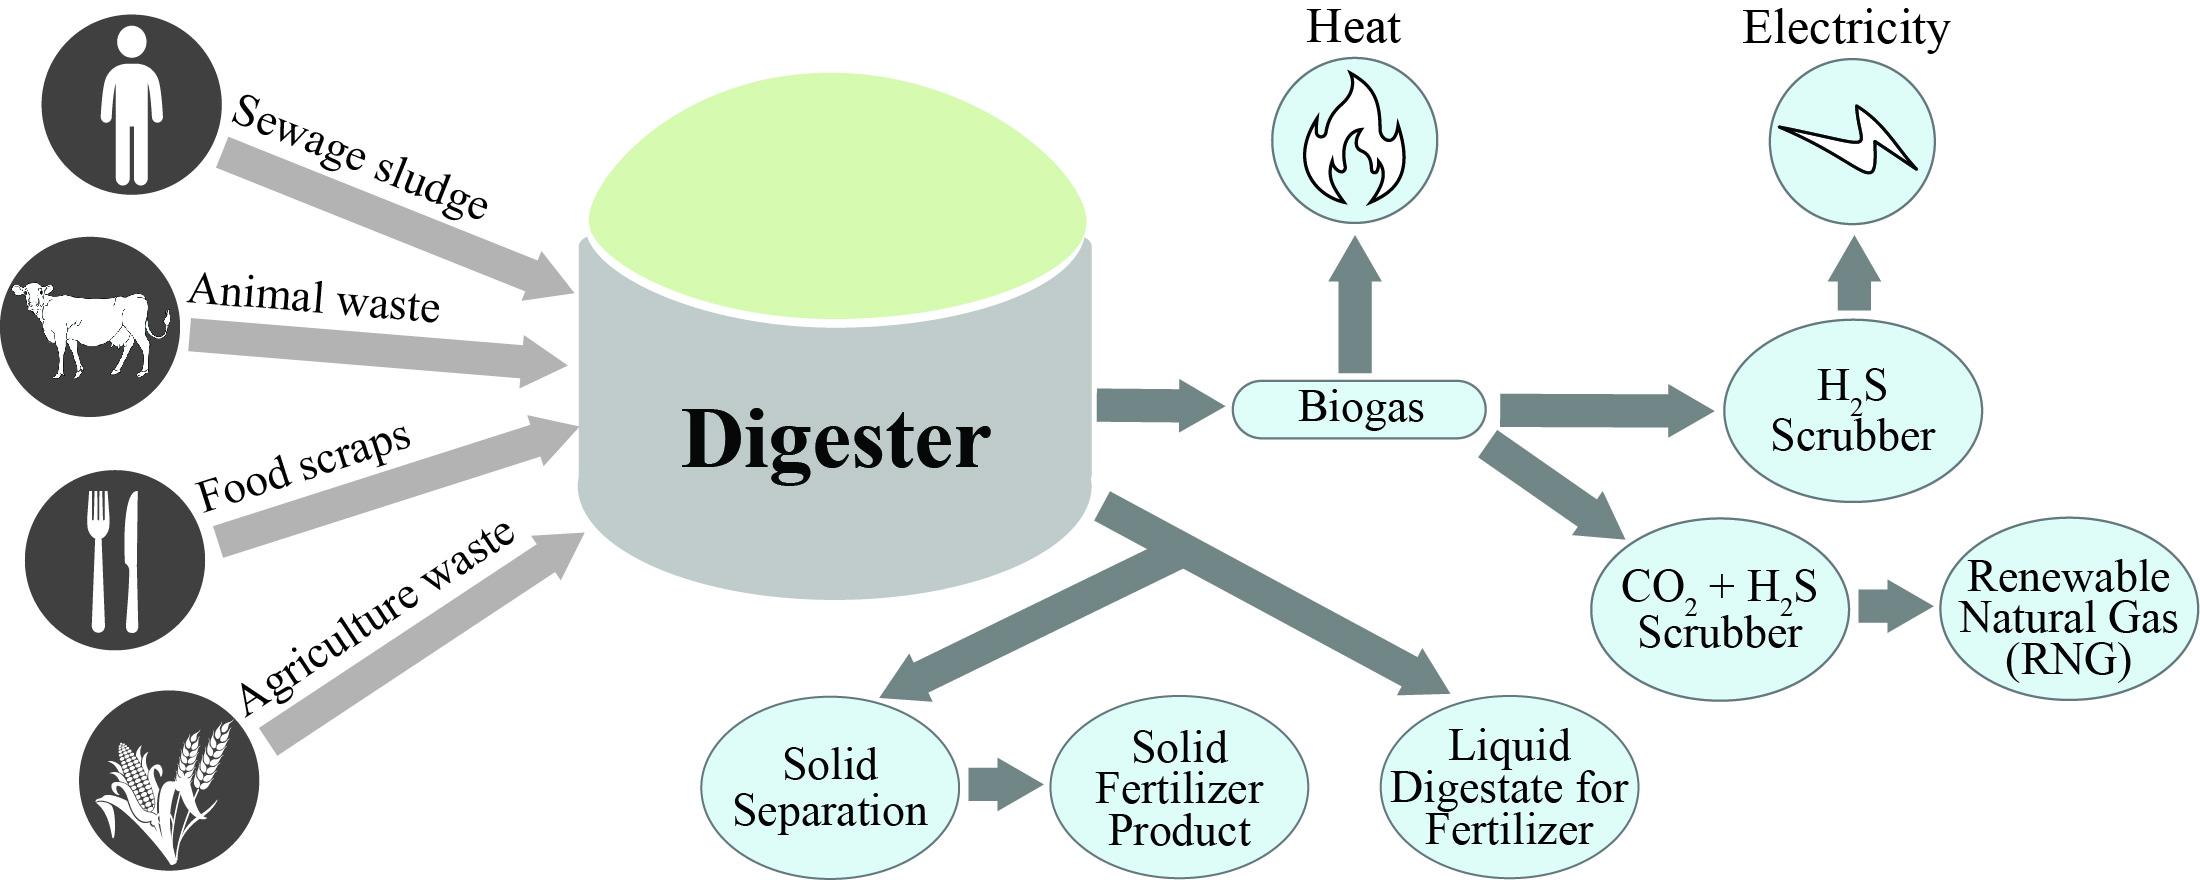 Diagram of the inputs and outputs of an anaerobic digestion bioenergy production system.